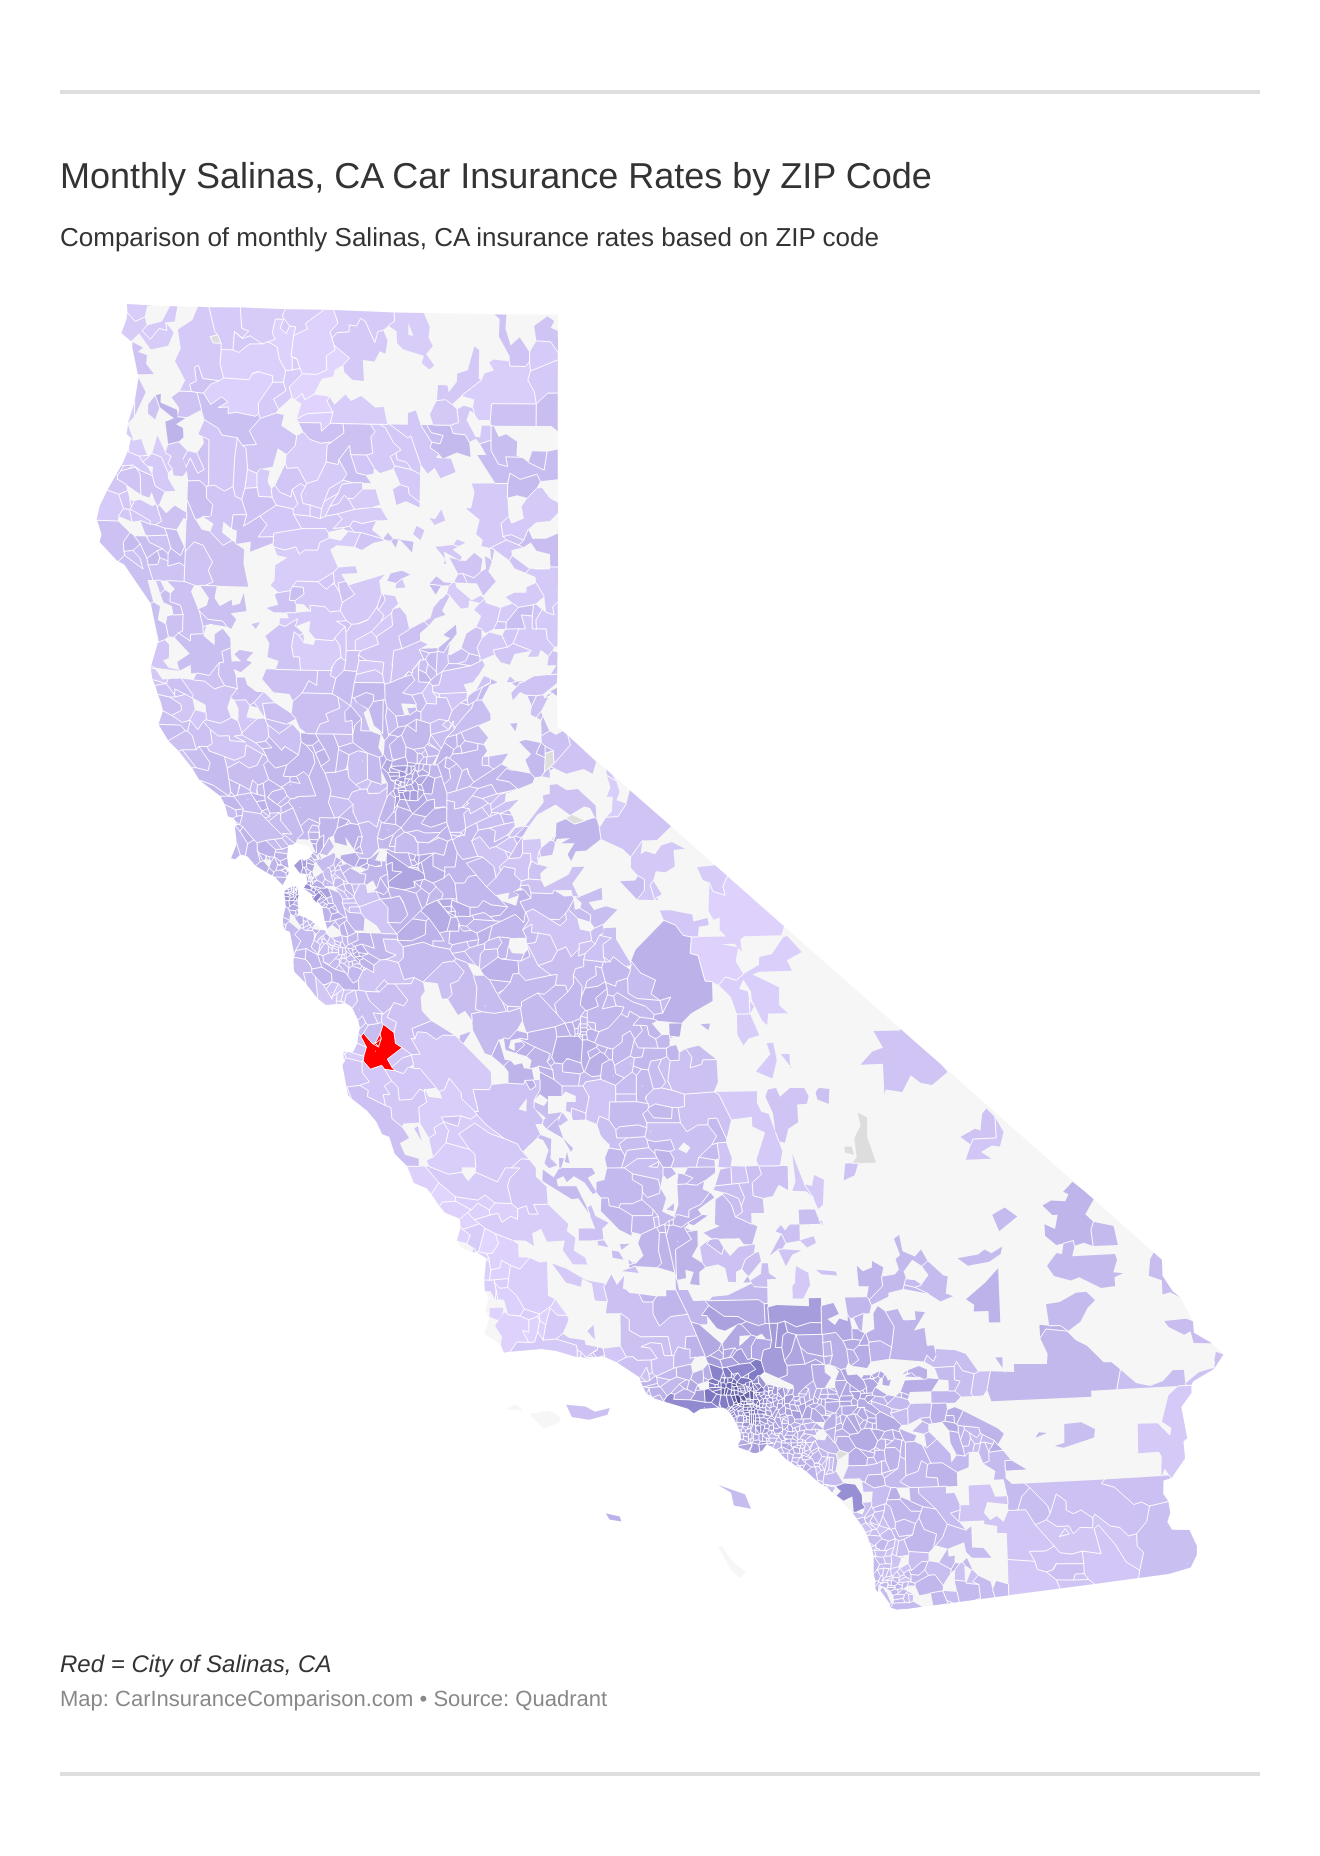 Monthly Salinas, CA Car Insurance Rates by ZIP Code